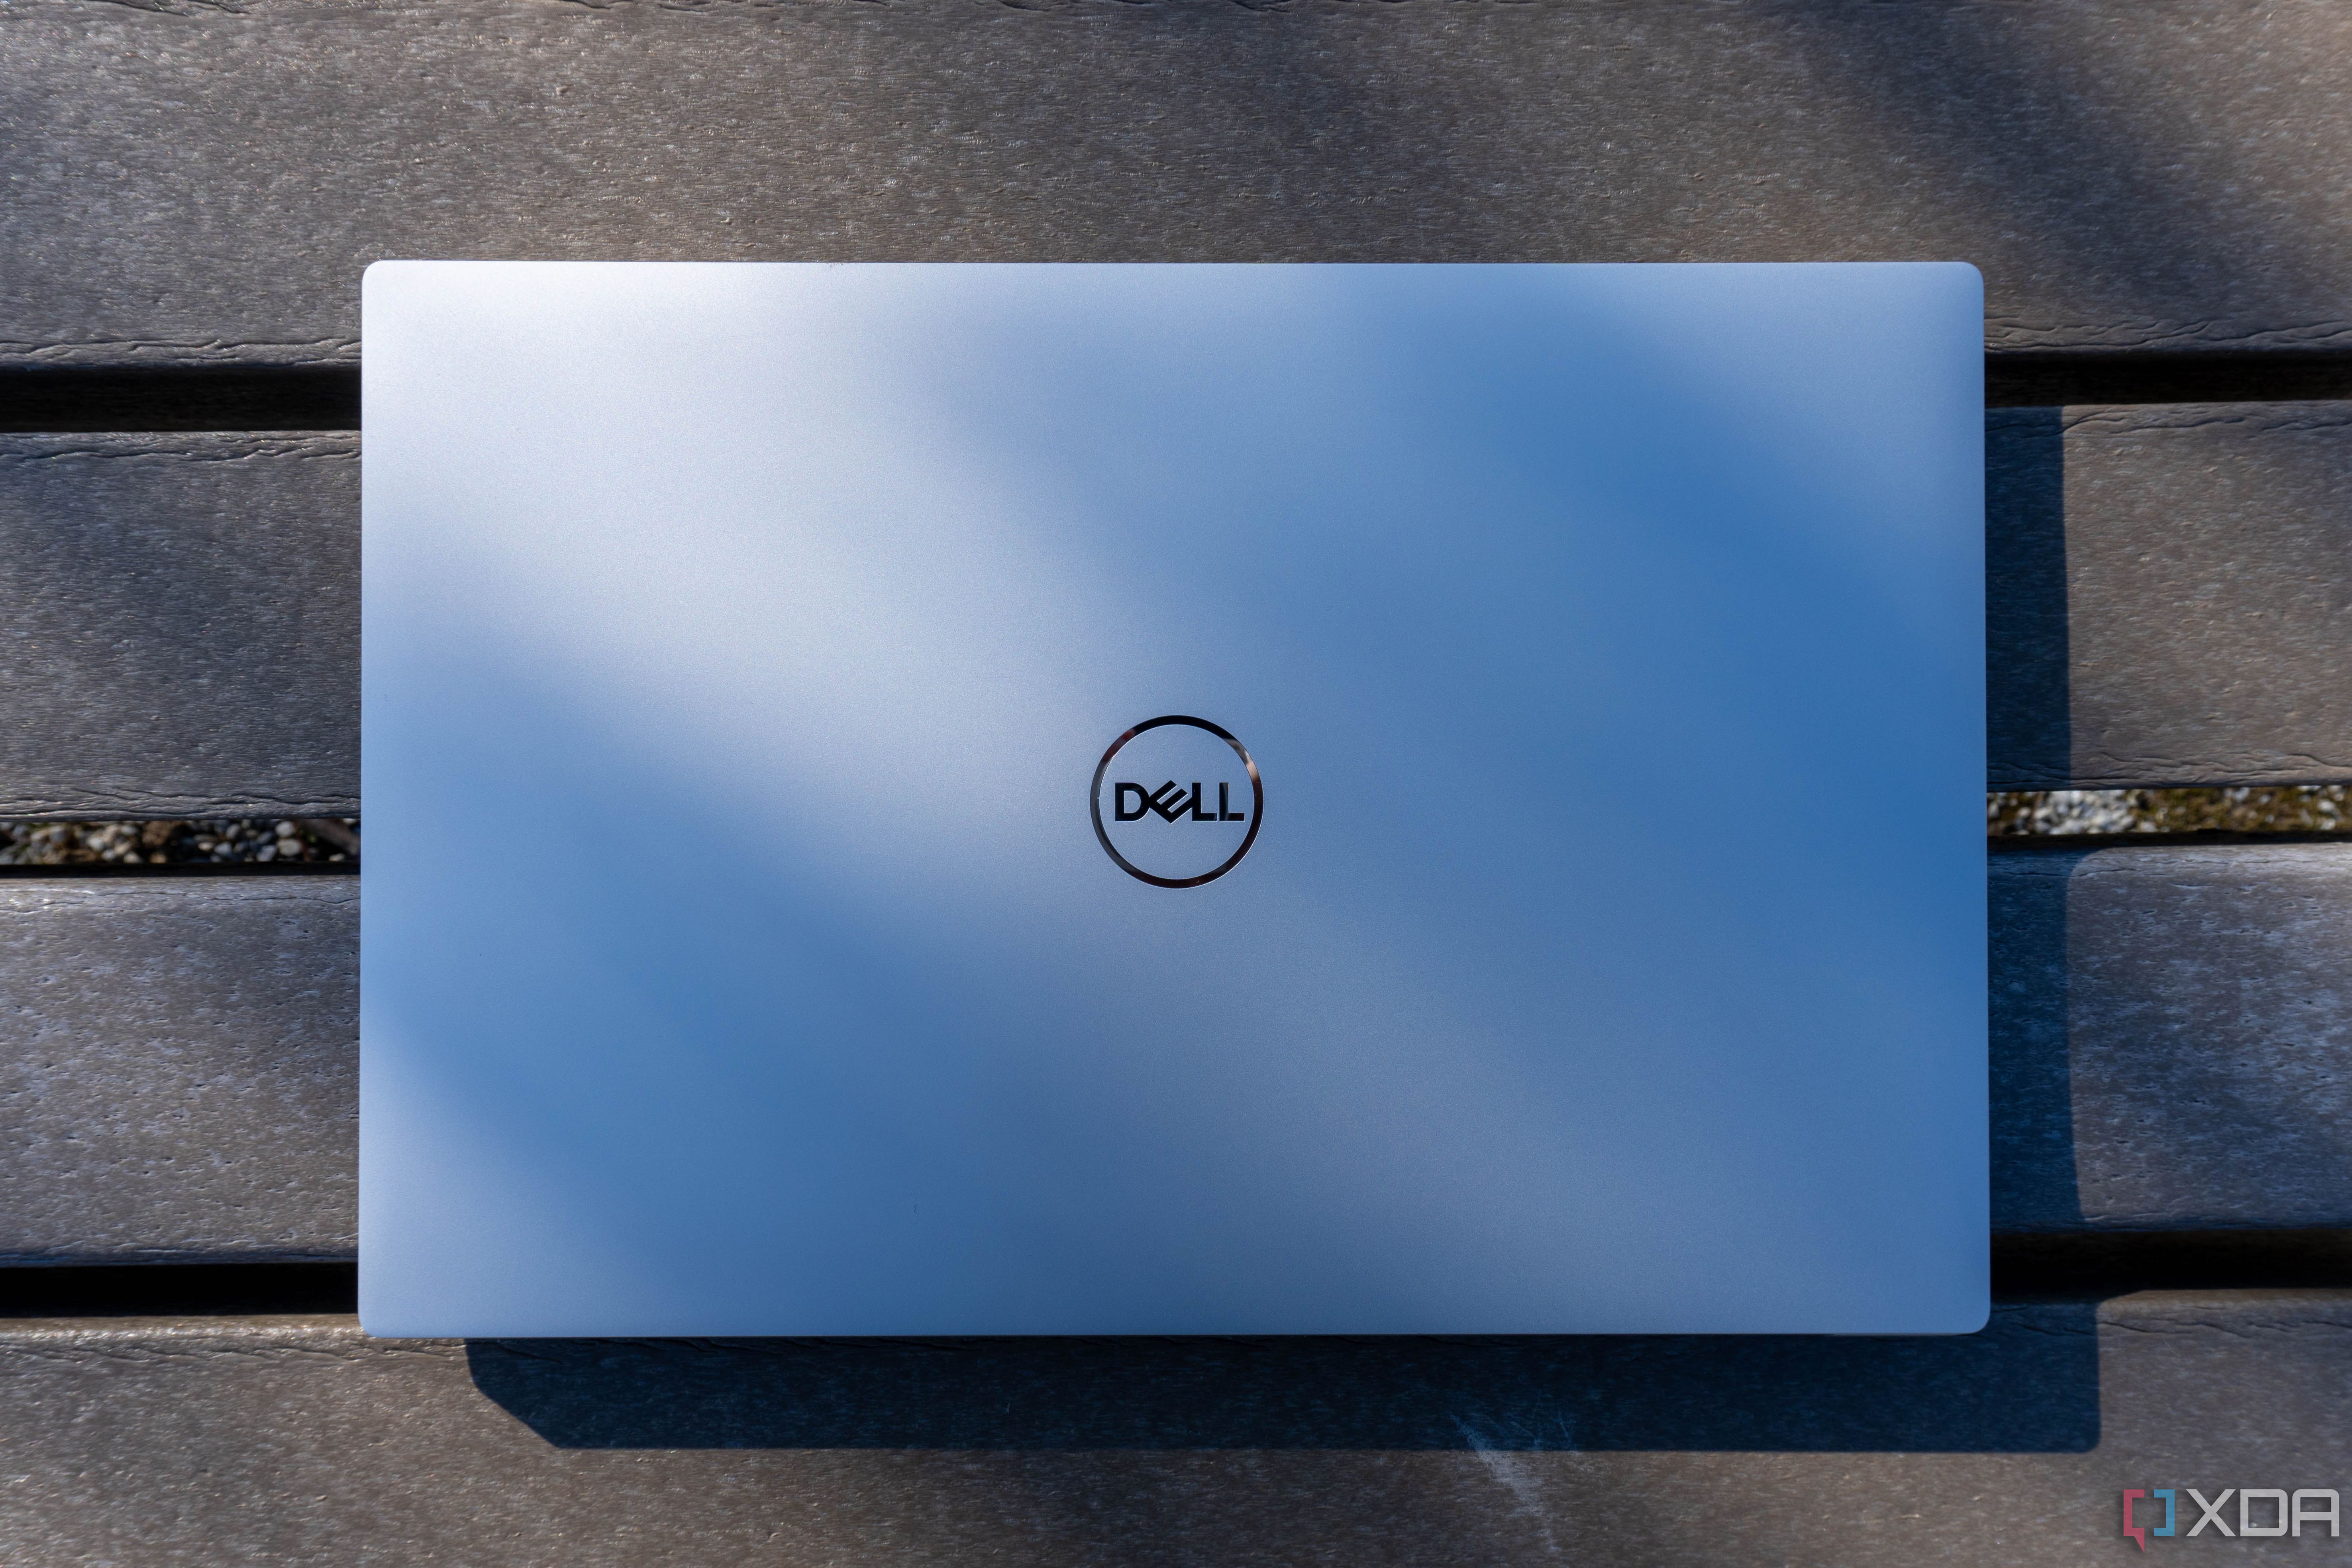 Top down view of Dell laptop